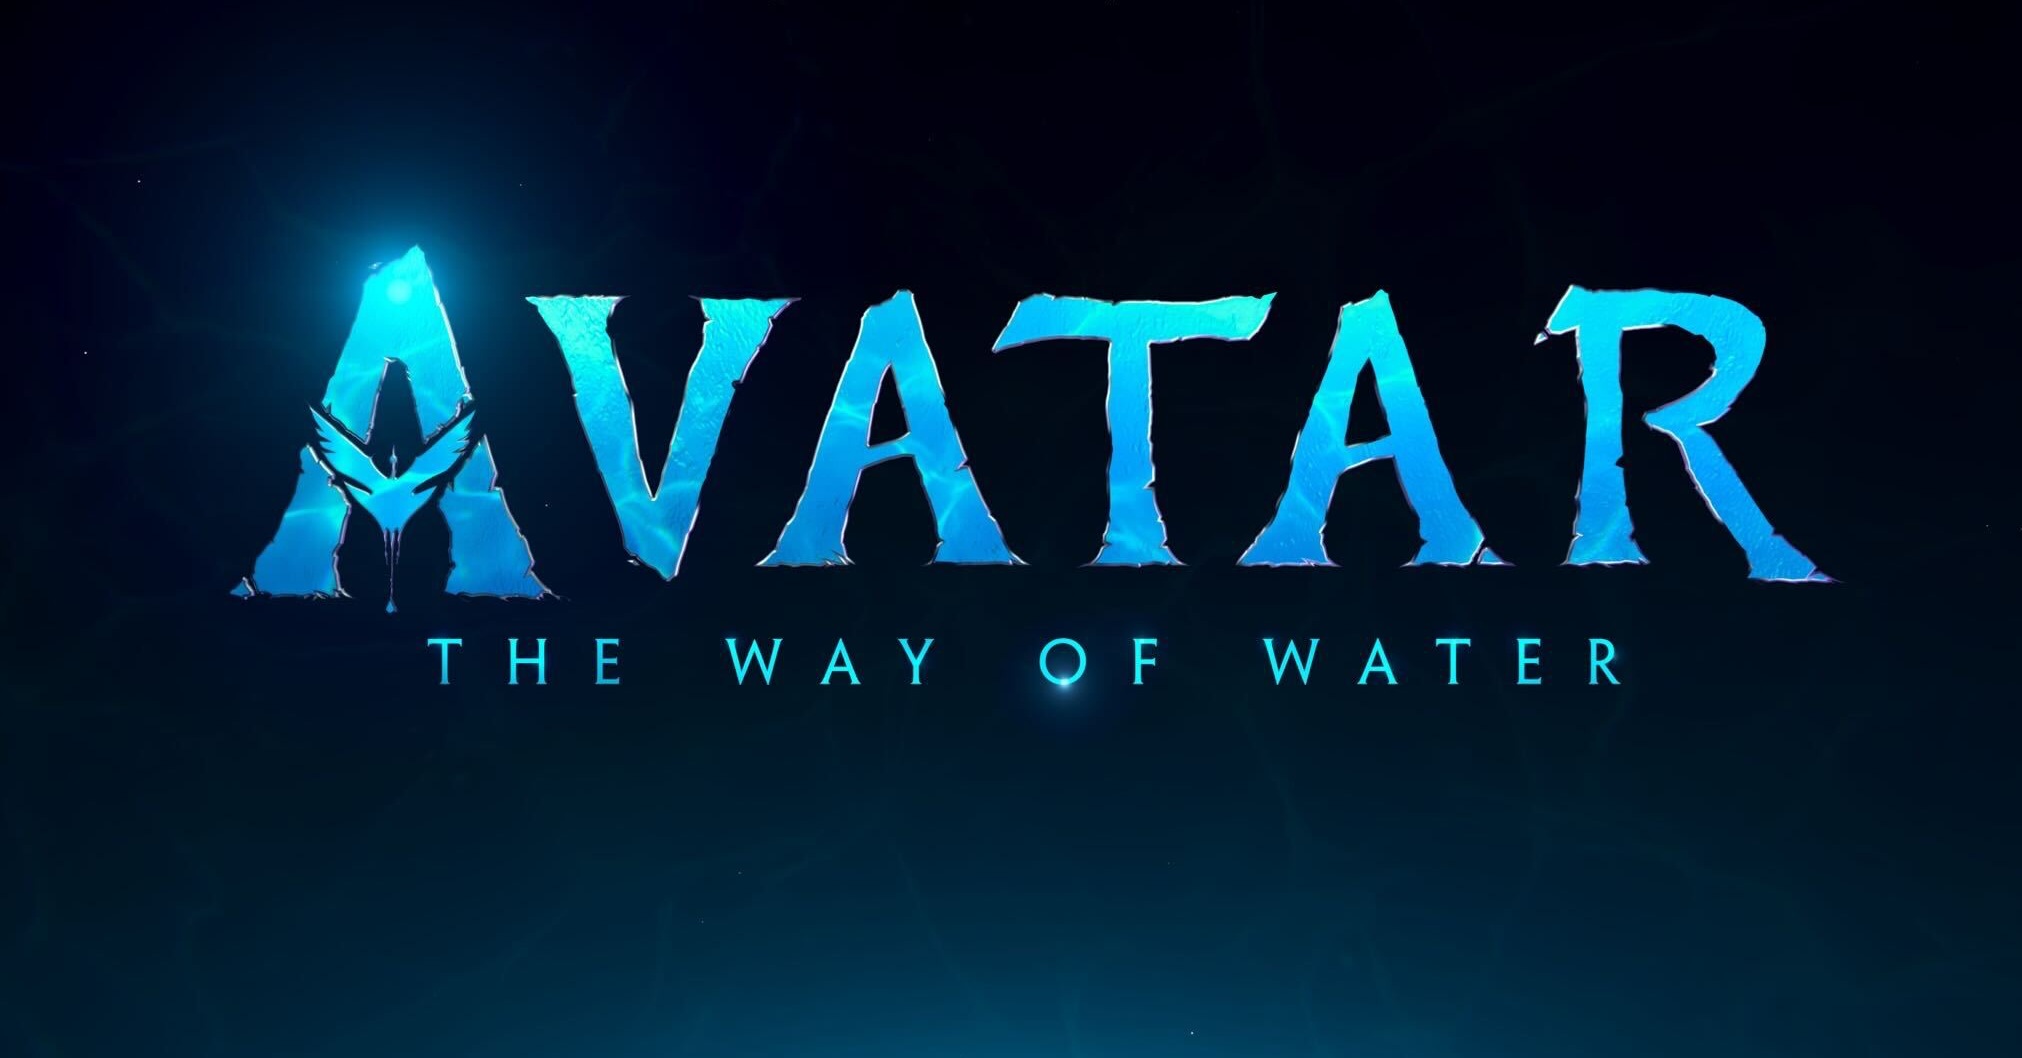 Official – Four sequels of Avatar titles and release dates